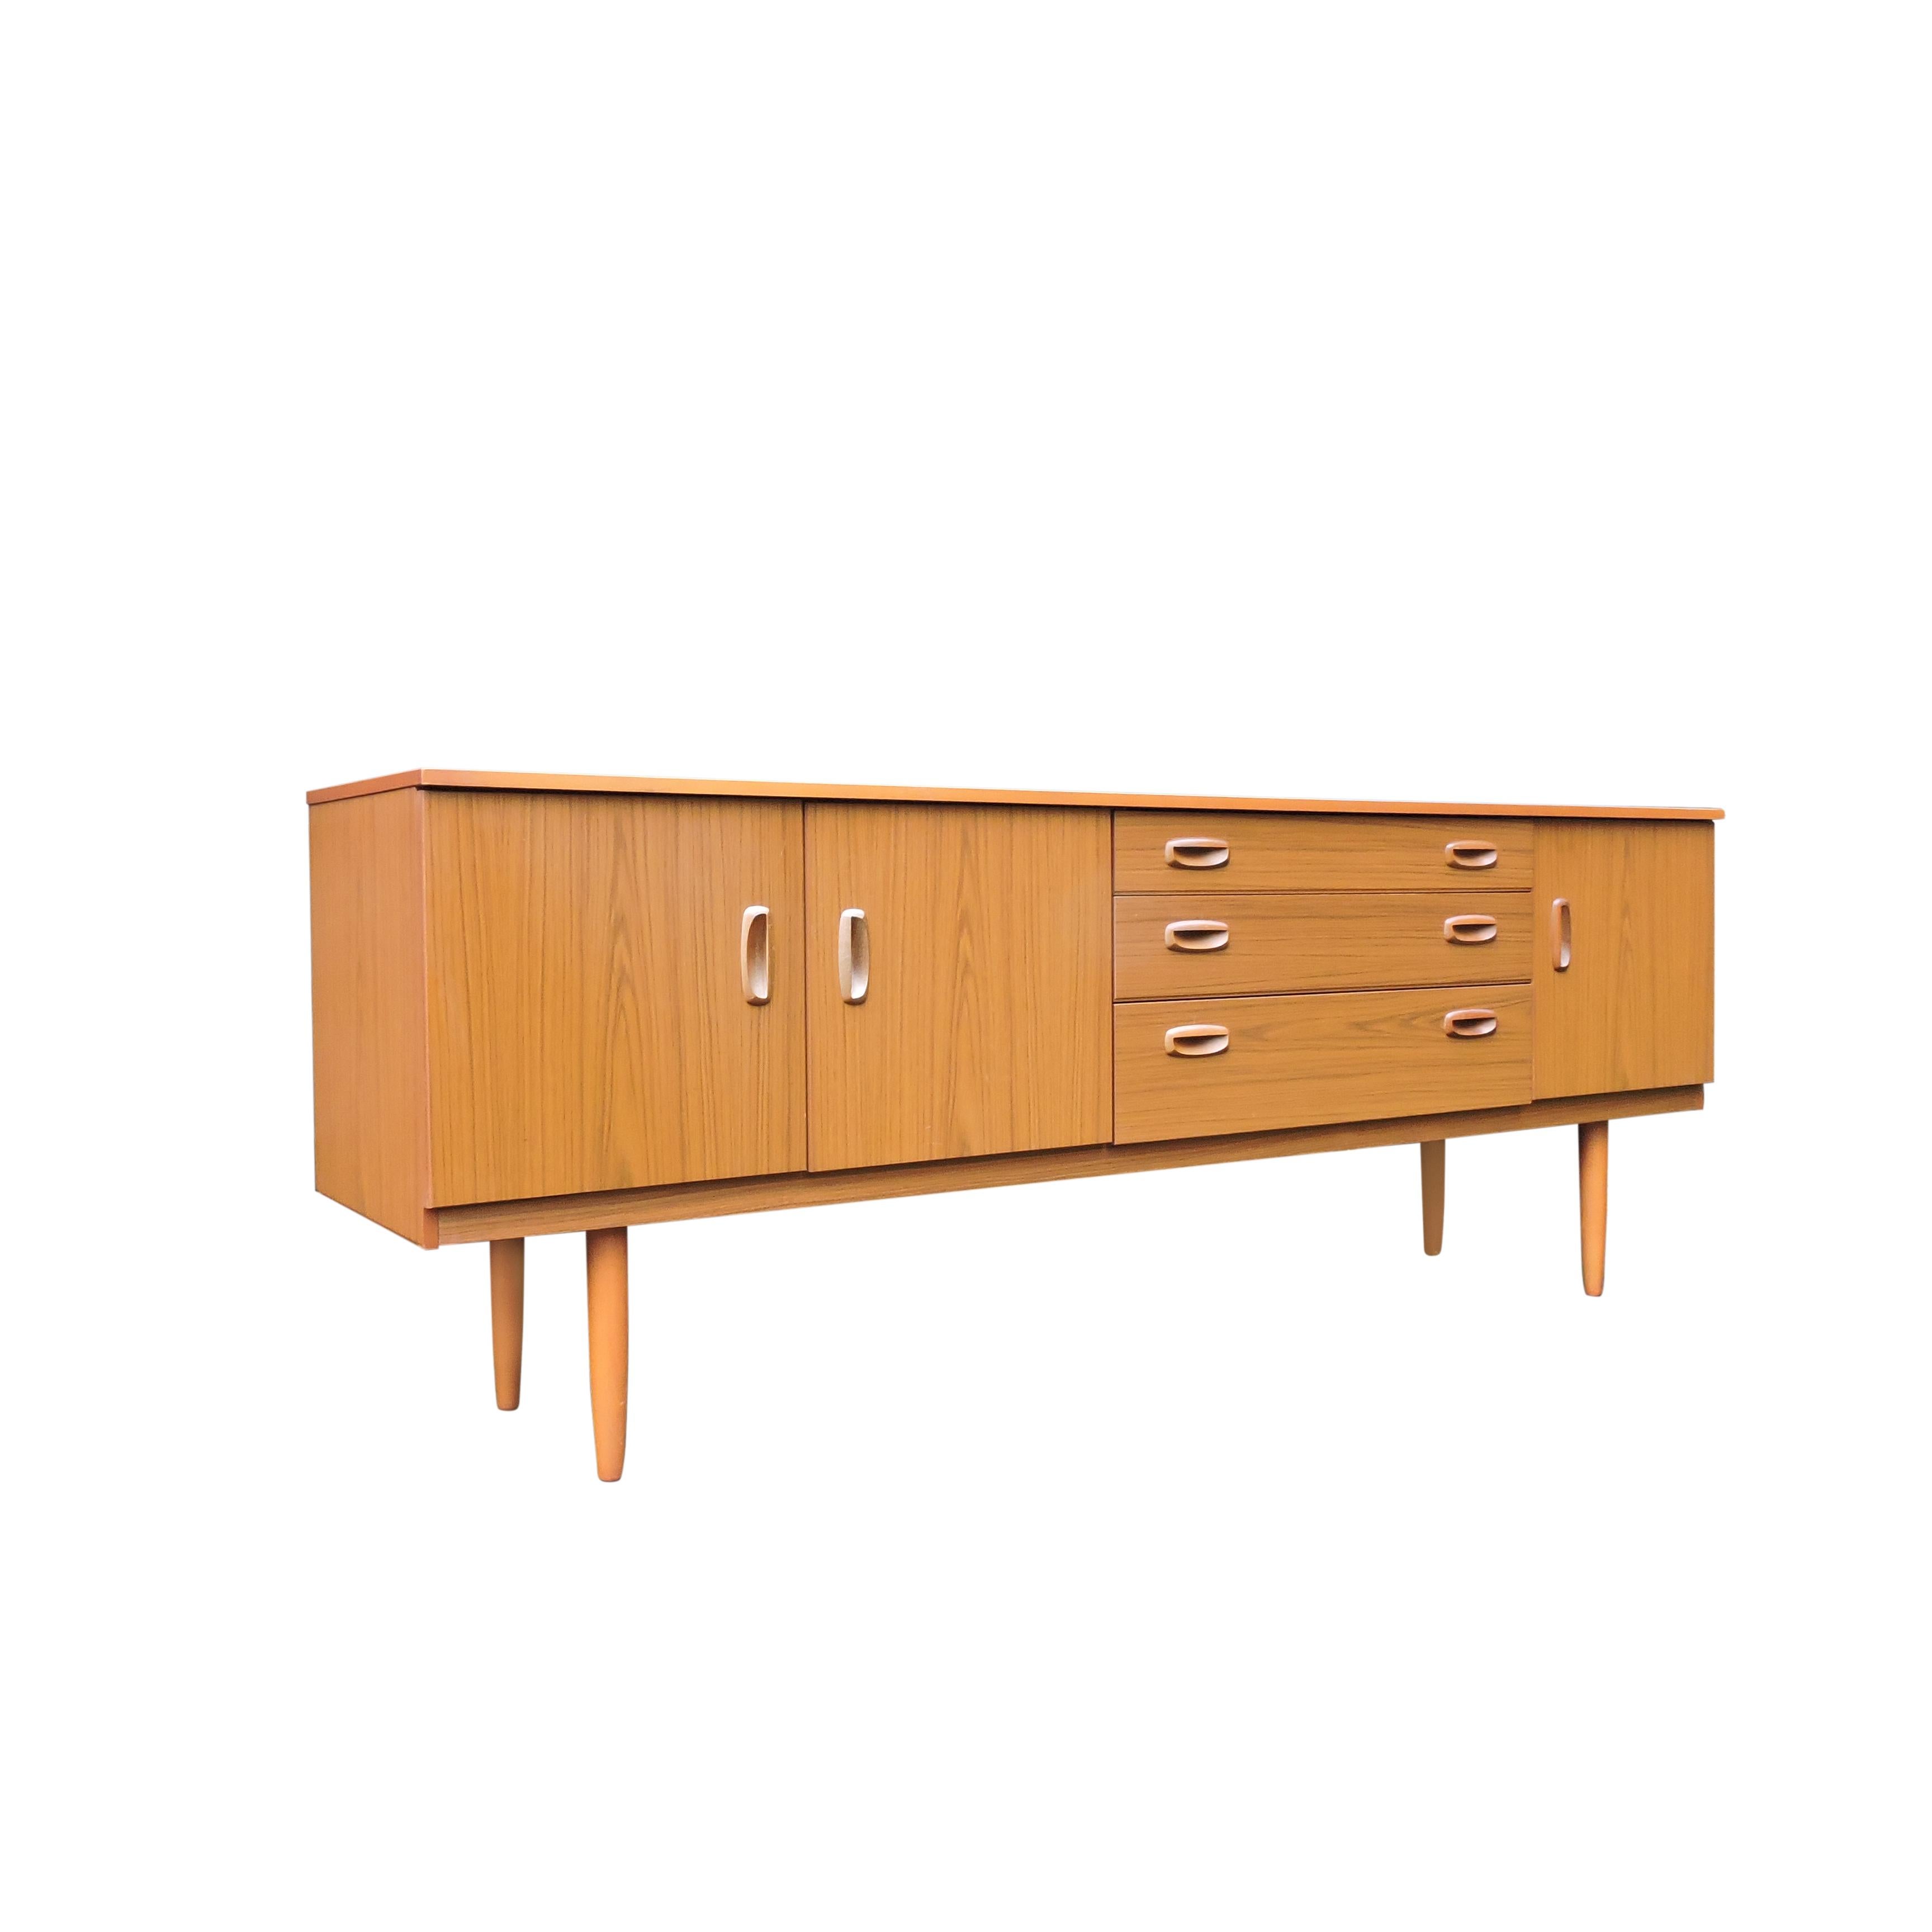 A long teak sideboard produced by Schreiber in the 1970s.